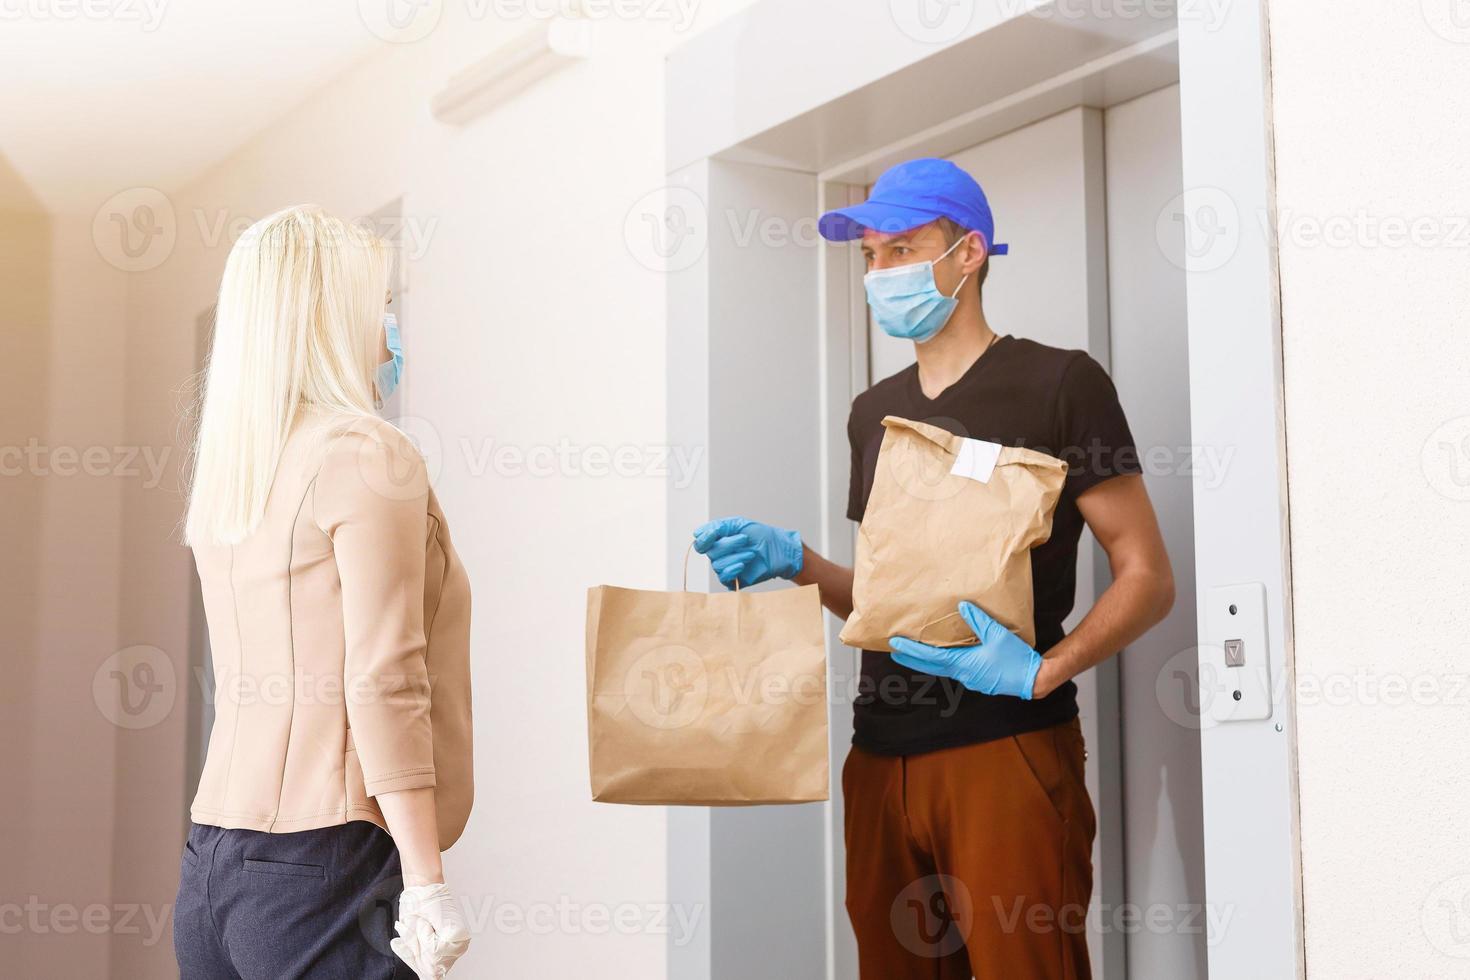 Young woman wearing medical mask receiving orderd food from the restaurant from delivery man indoors. Prevention of virus spread photo